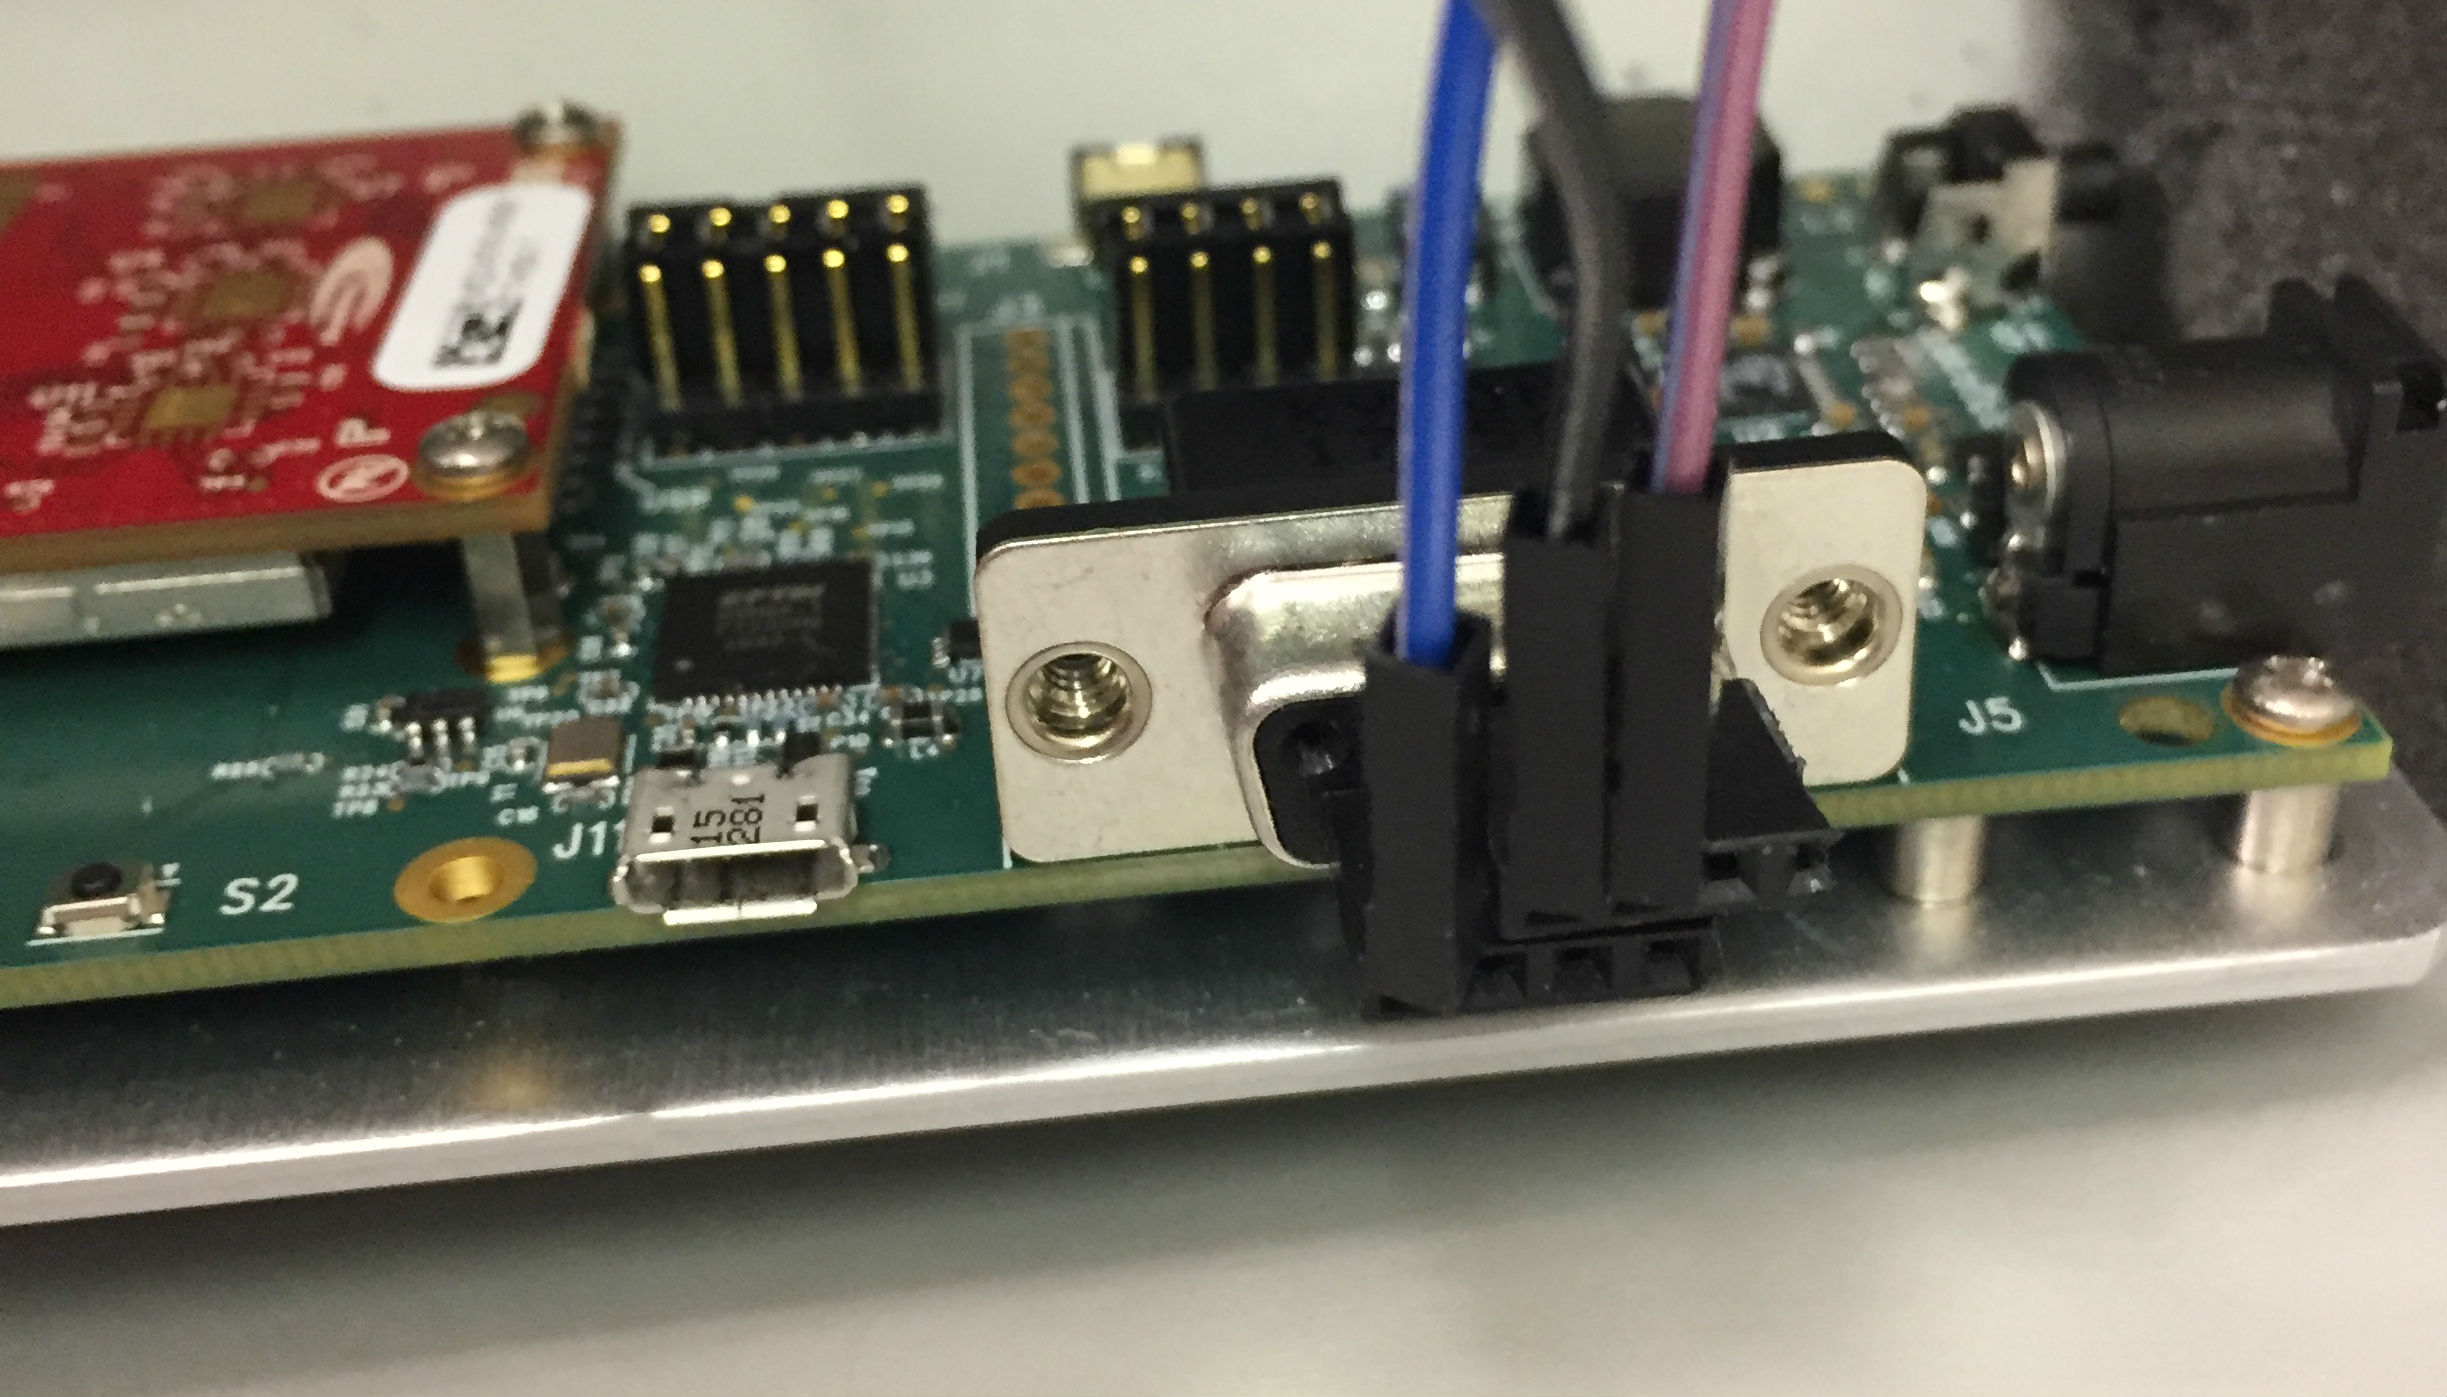 Female stacking row headers interfaced into D9 serial port